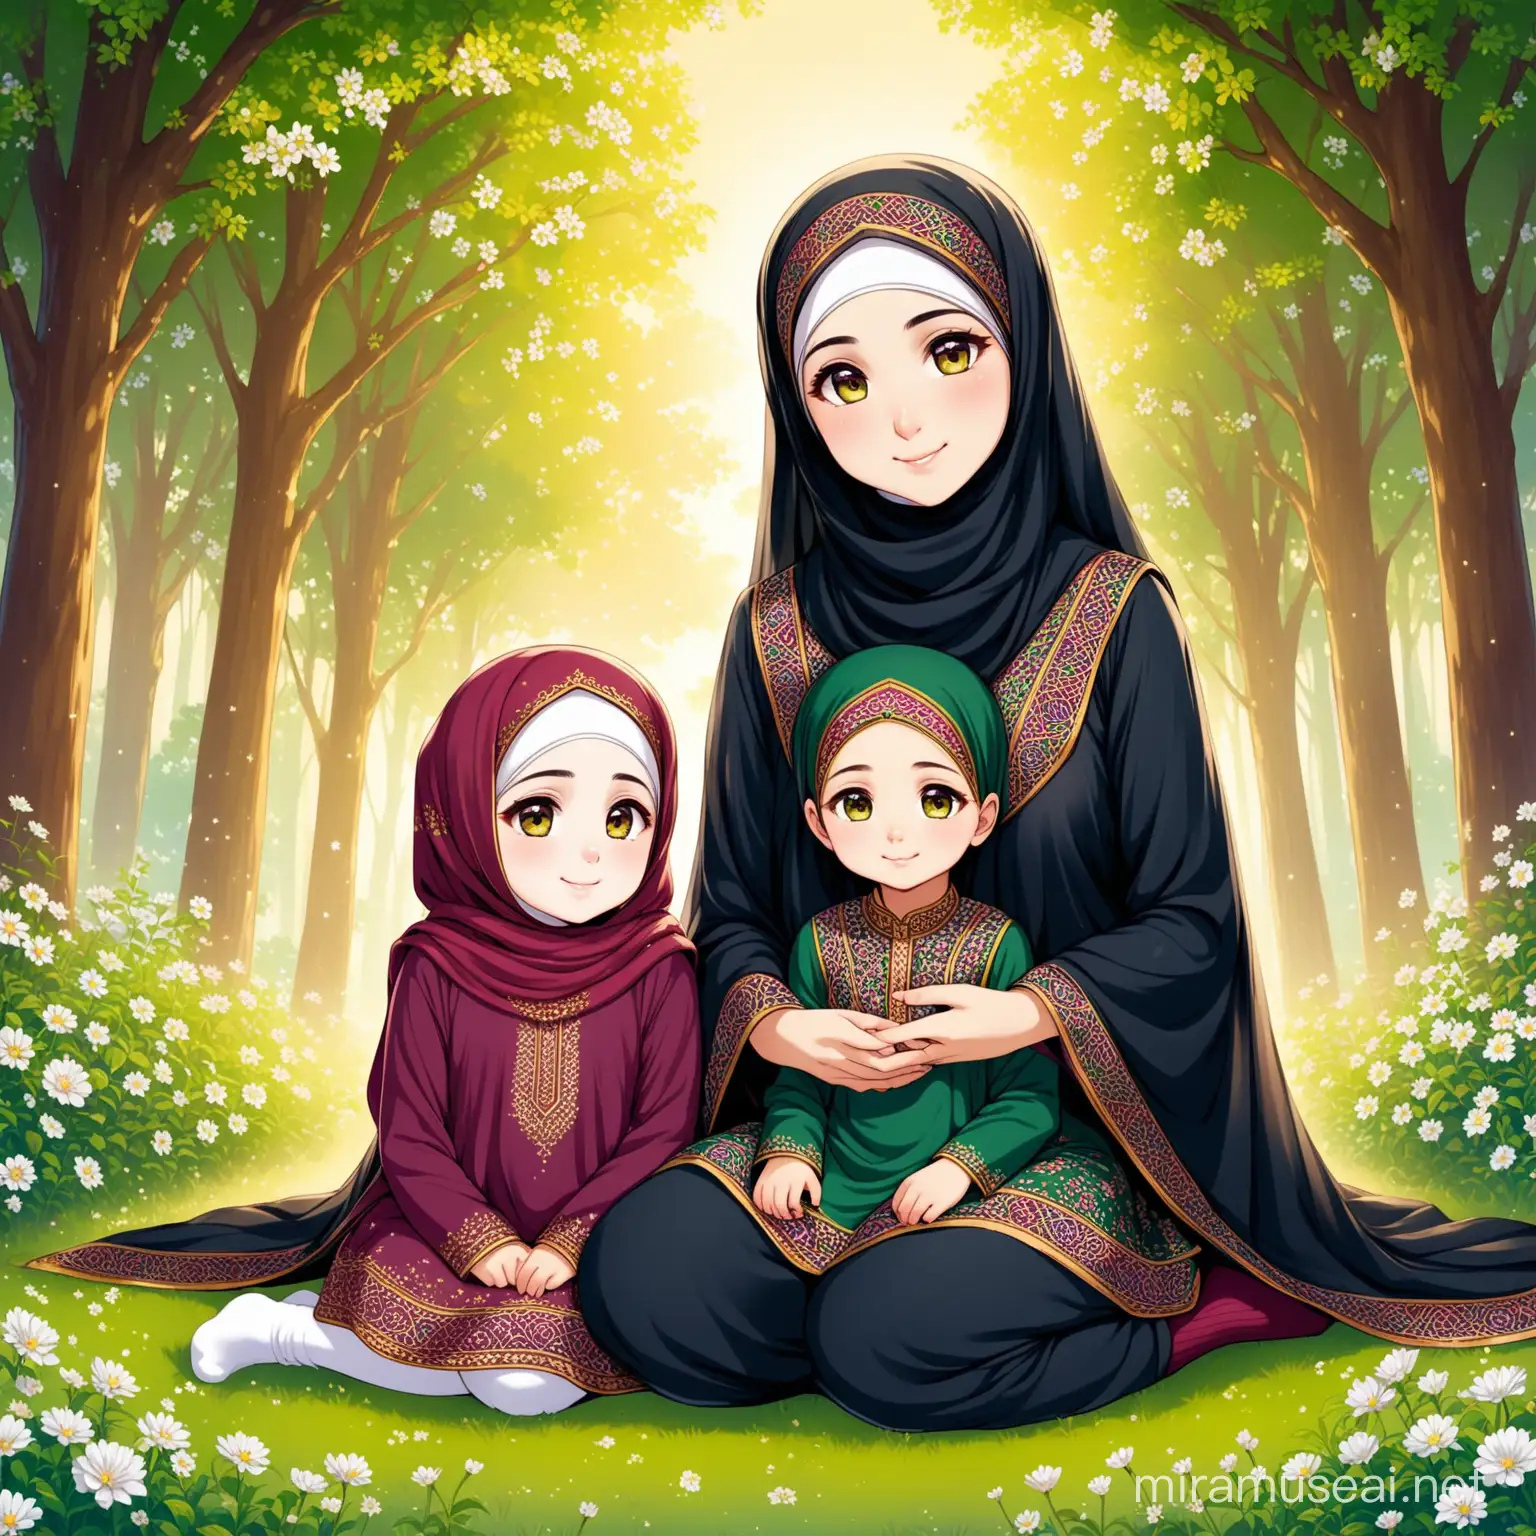 Persian Girl Fatemeh Sitting with Mother Roqayeh in Forest Clearing